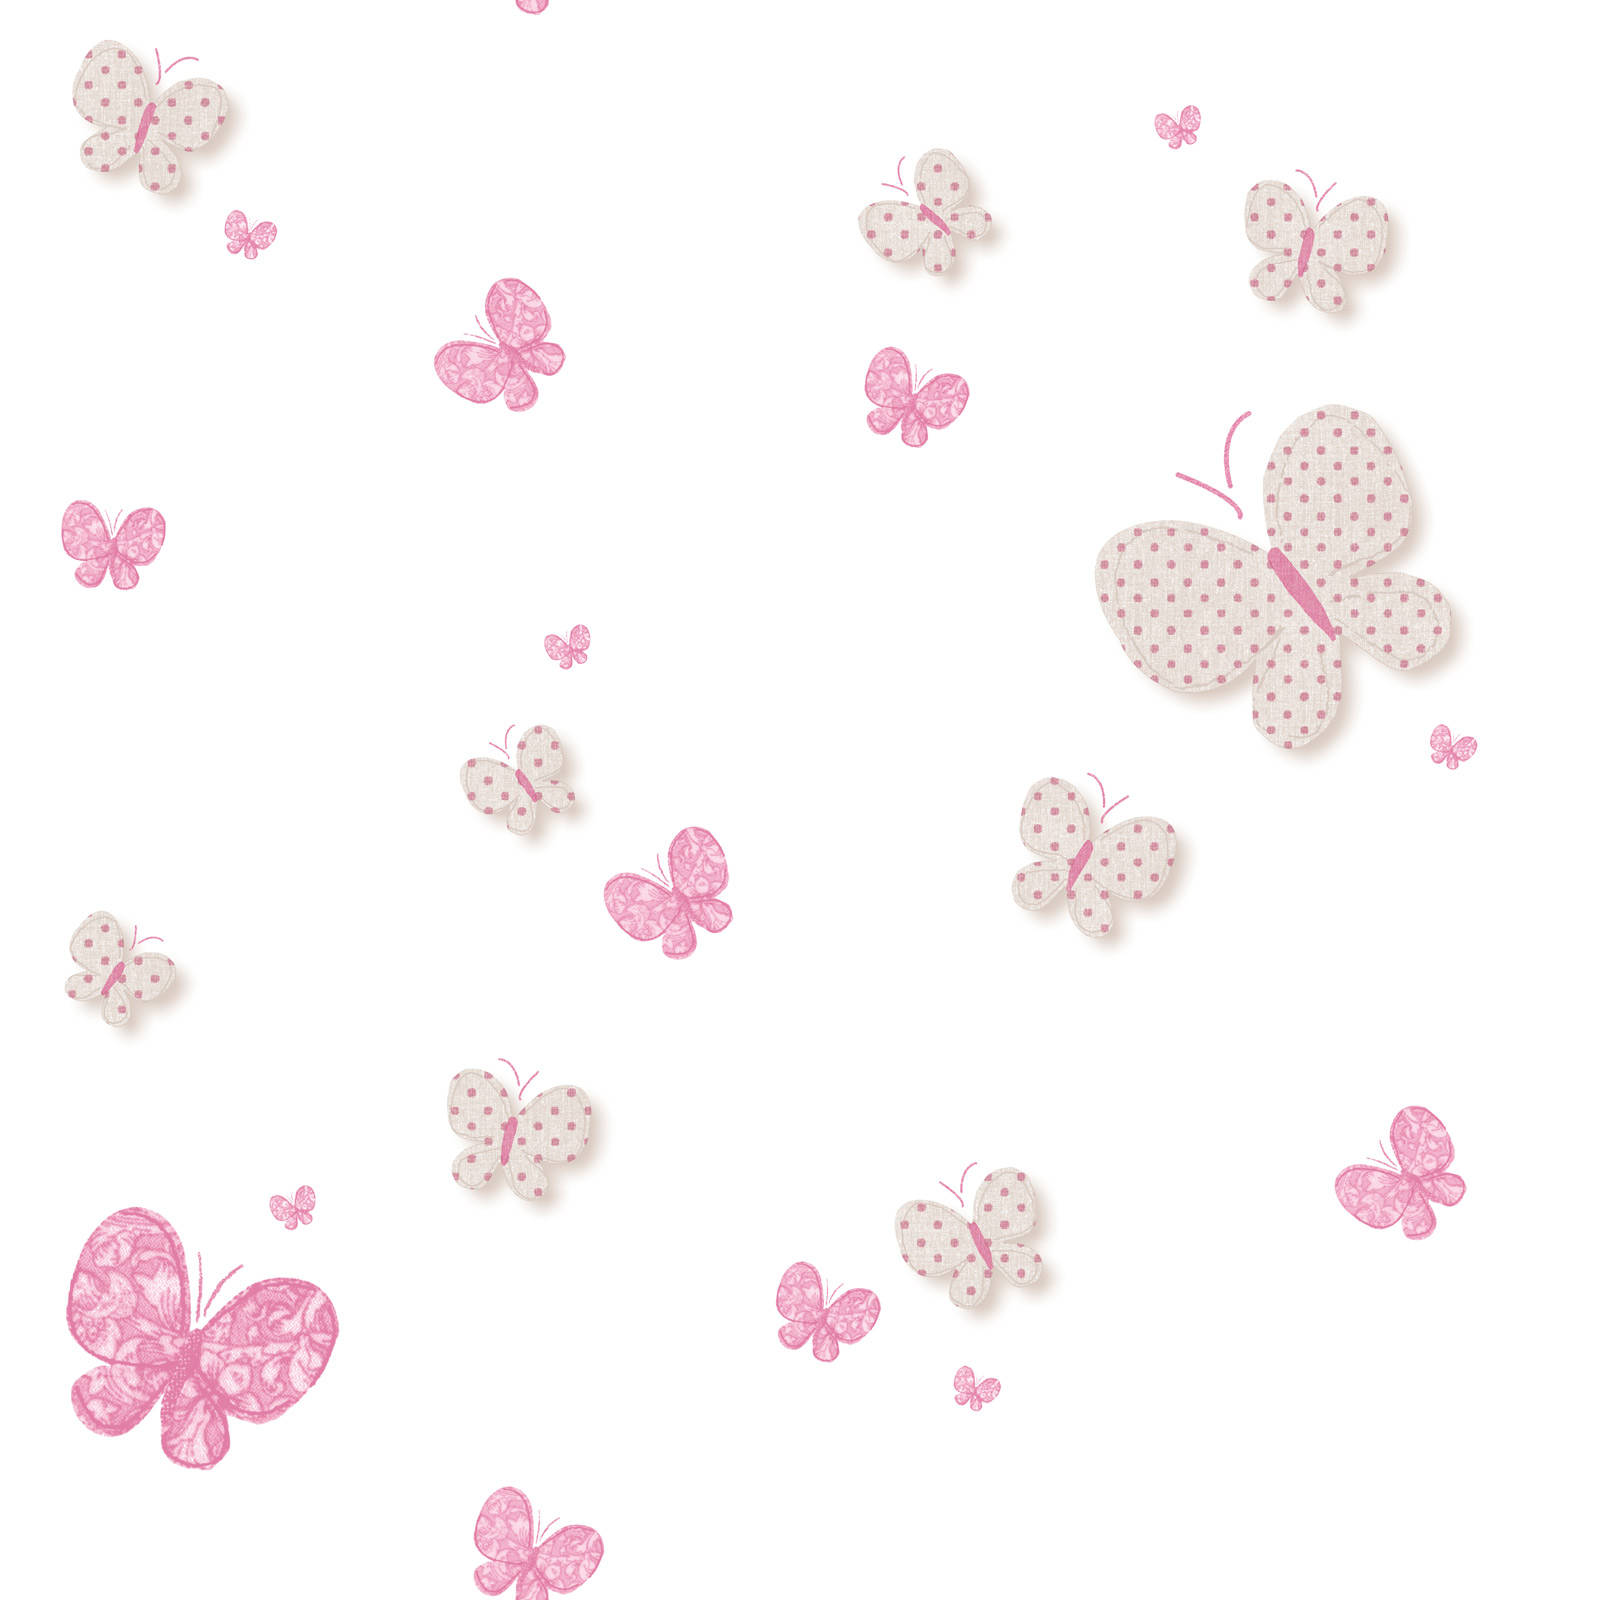 White Polkadots And Cute Pink Butterfly Insects Wallpaper